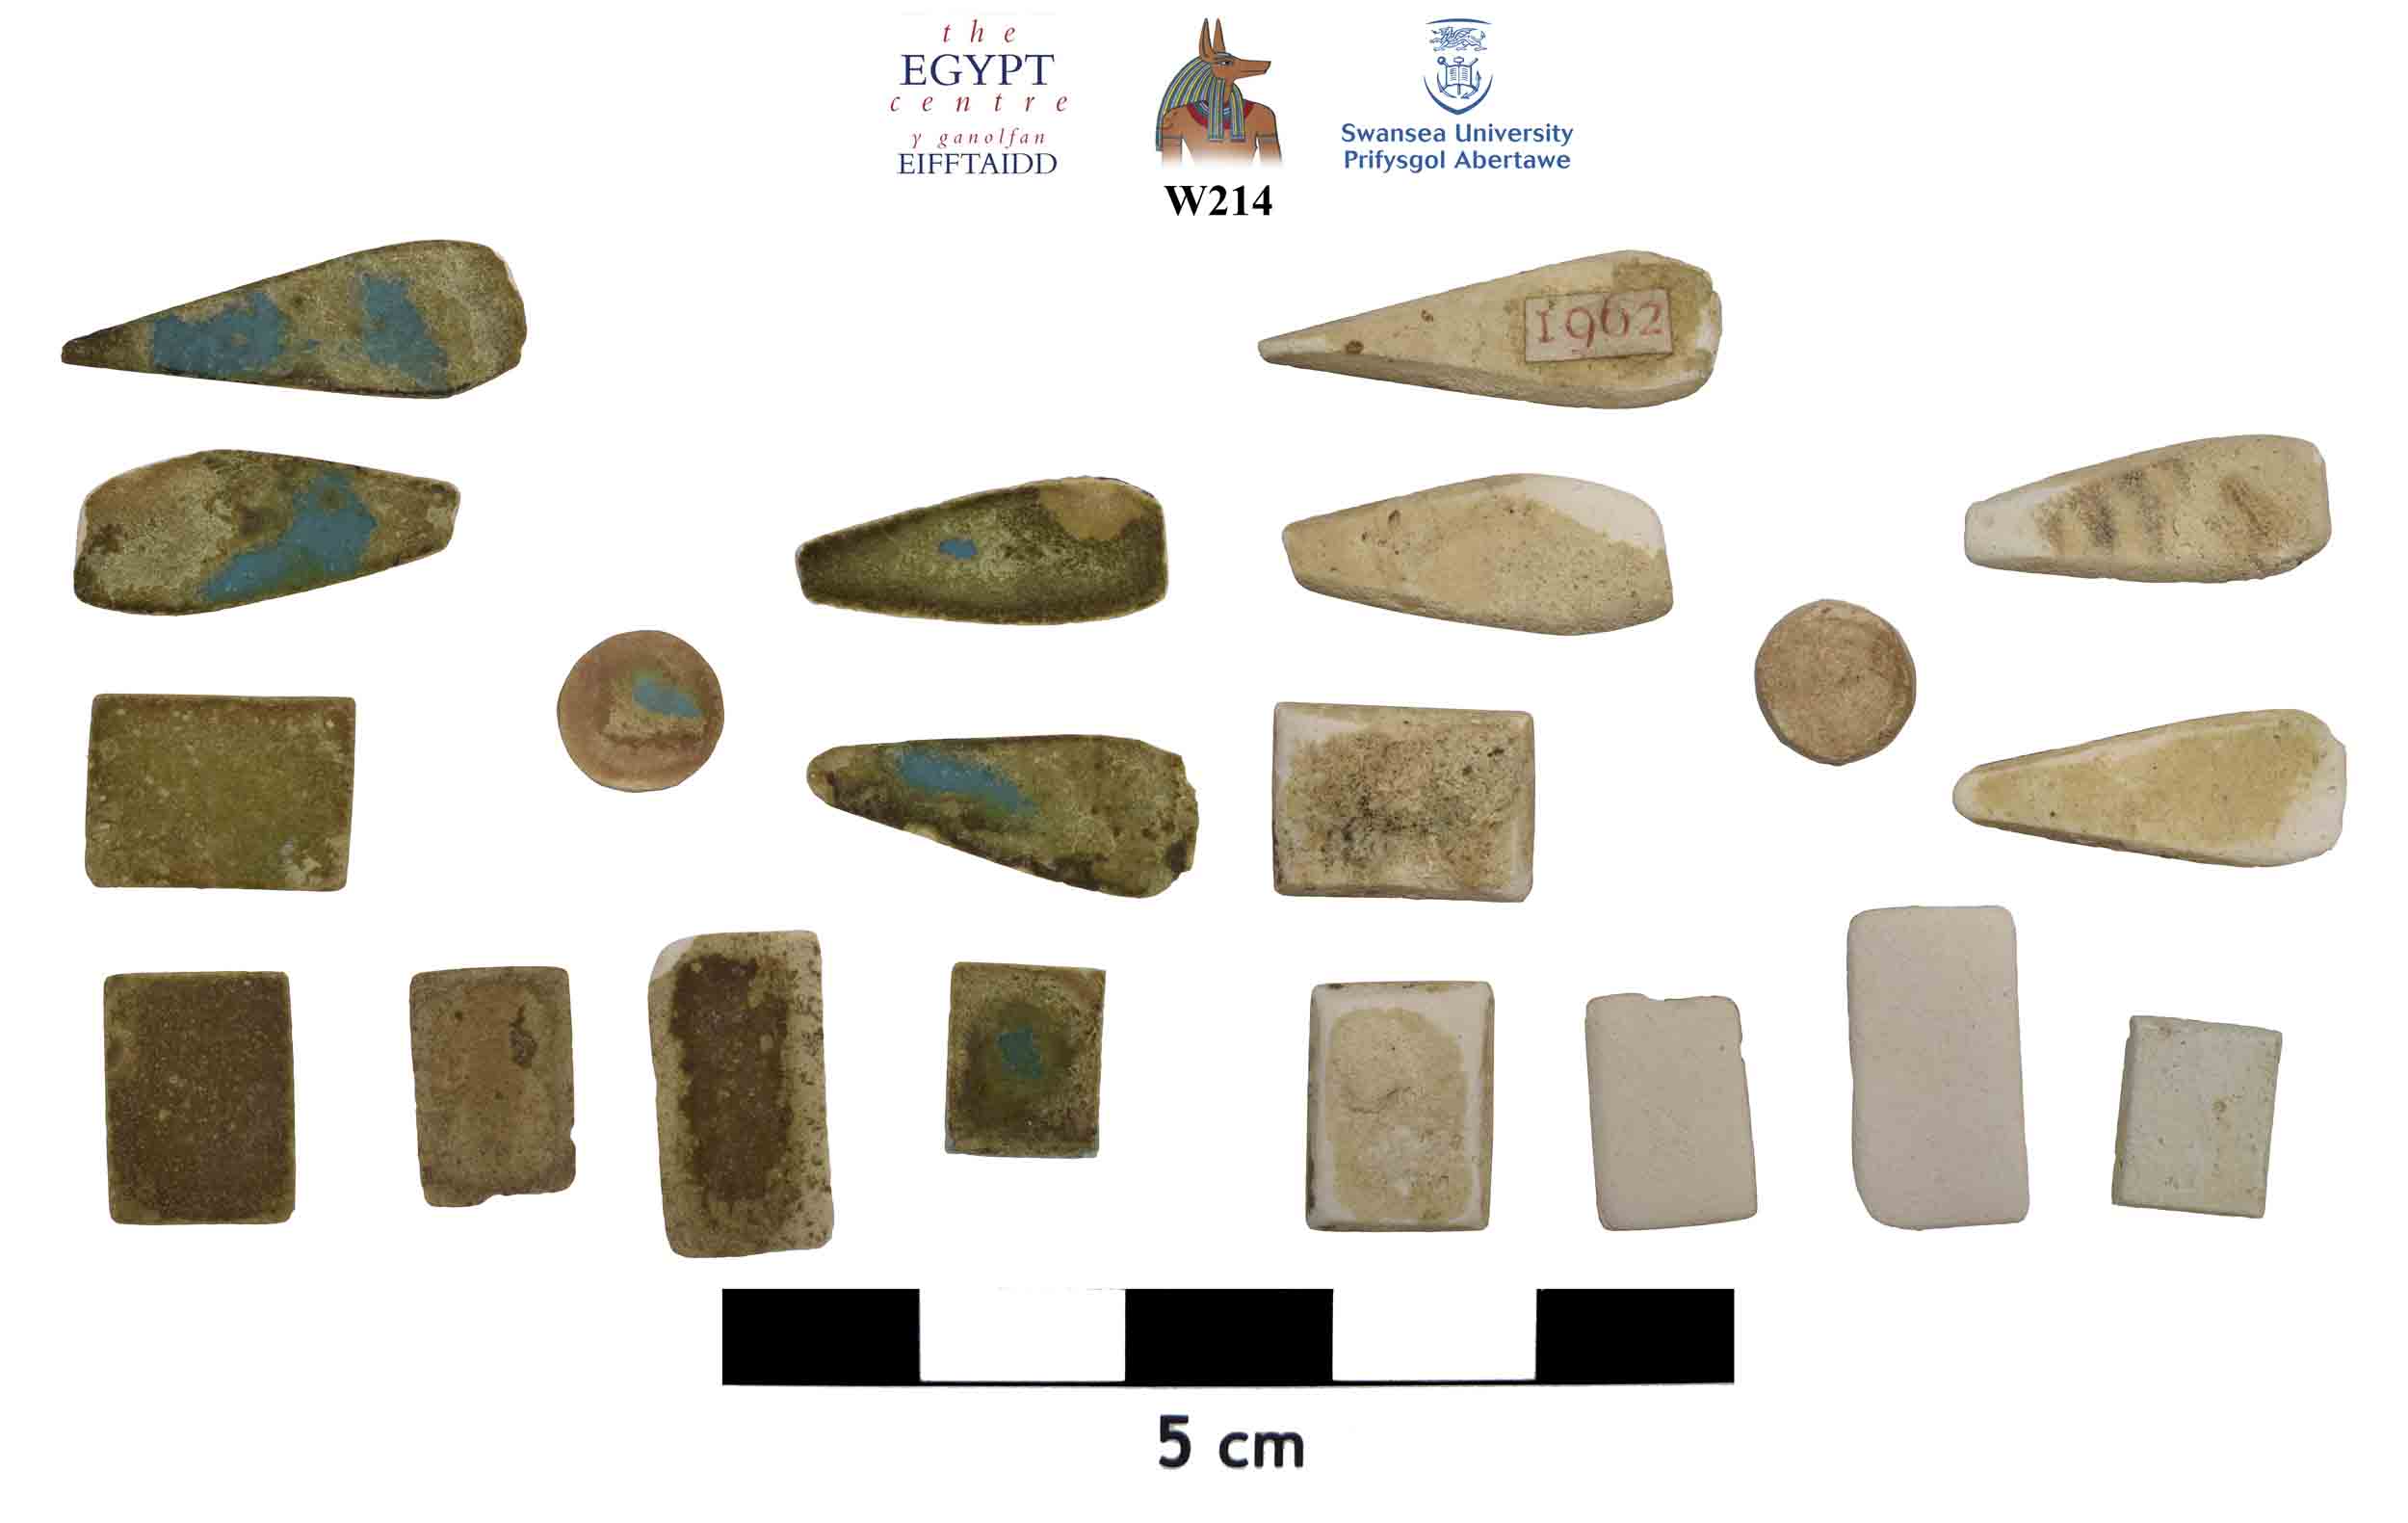 Image for: Fragments of faience